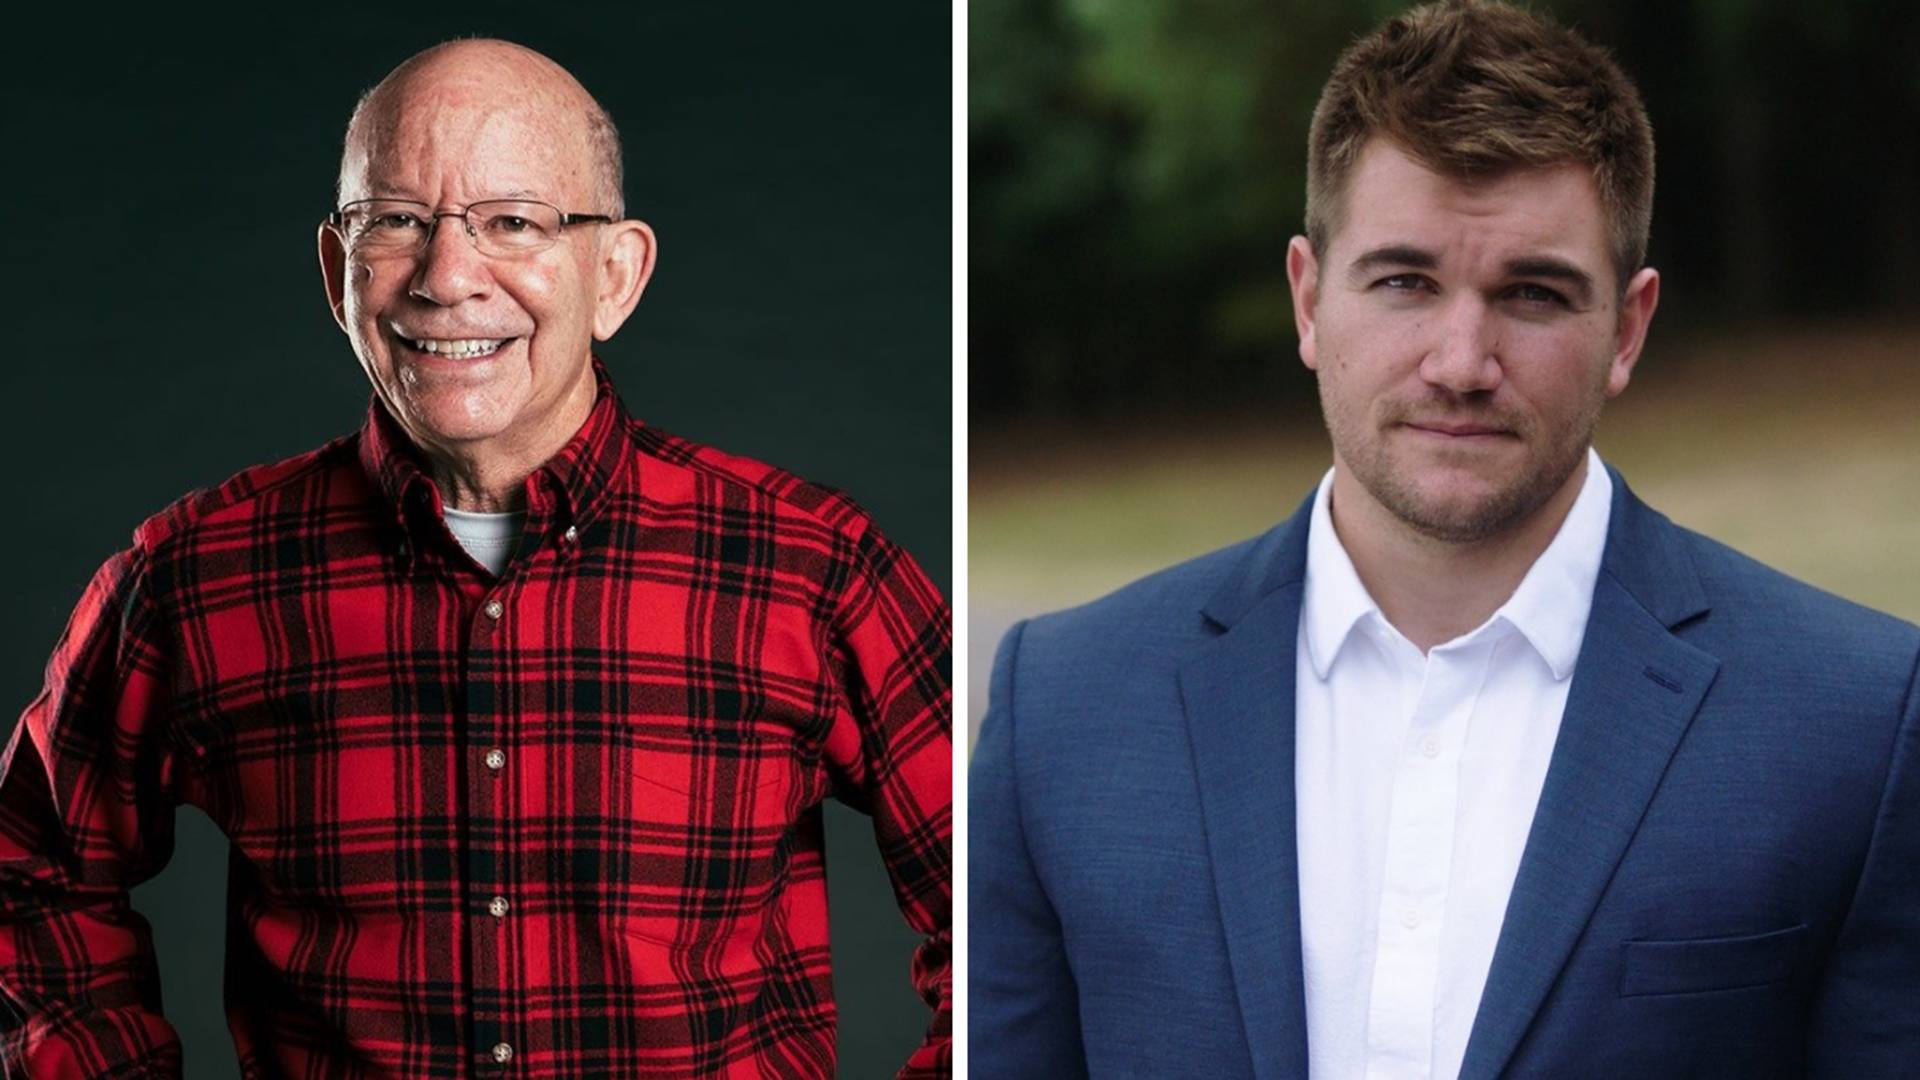 Longtime Democratic Congressman Peter DeFazio is facing Republican challenger Alek Skarlatos in a race that has received national attention.